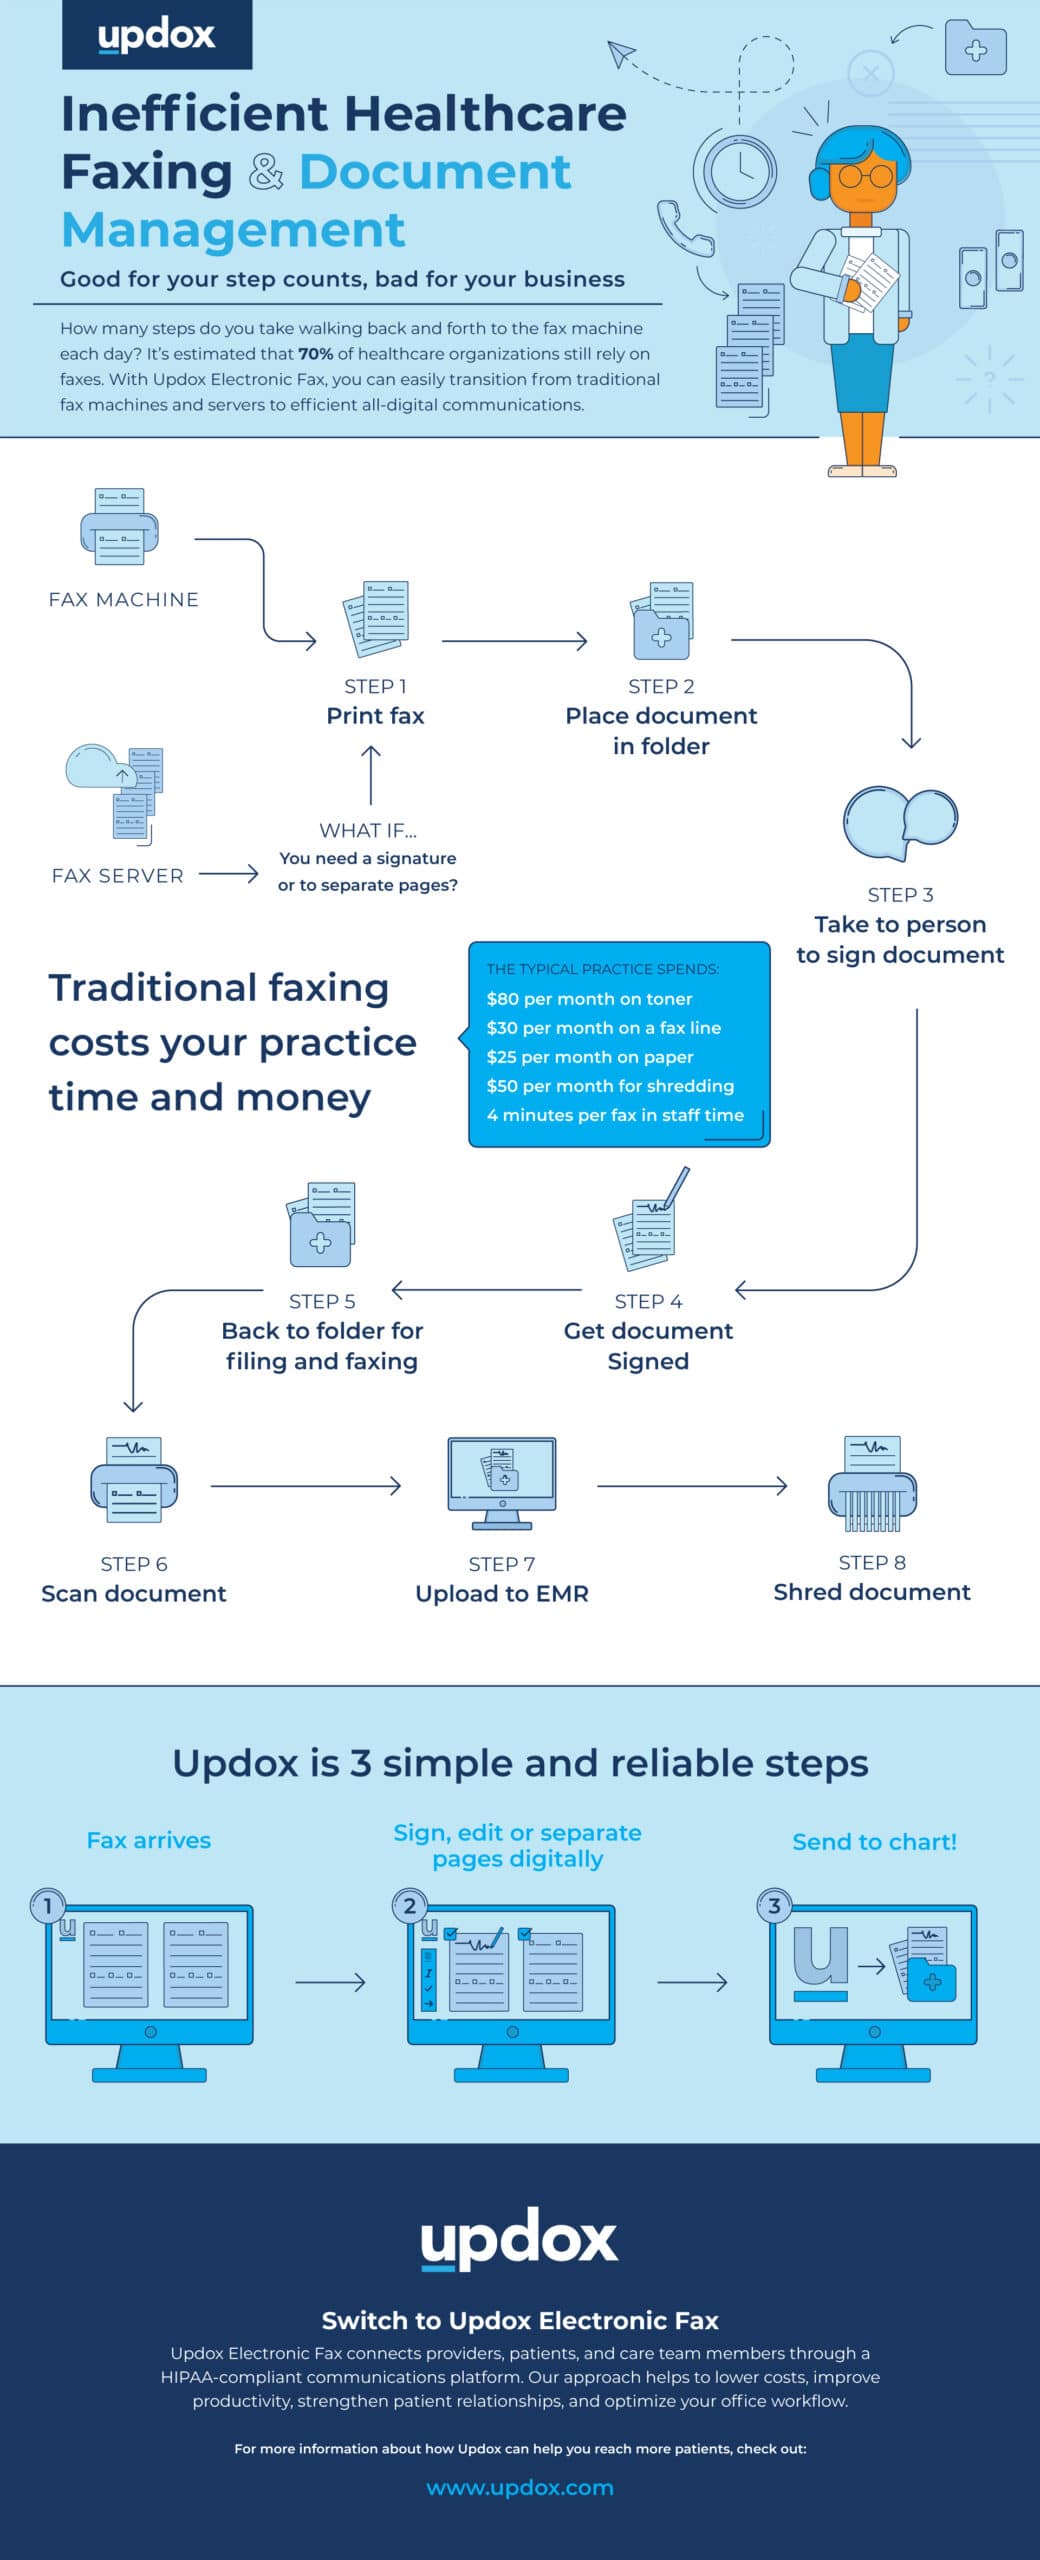 Inefficient Healthcare Faxing & Document Management Infographic